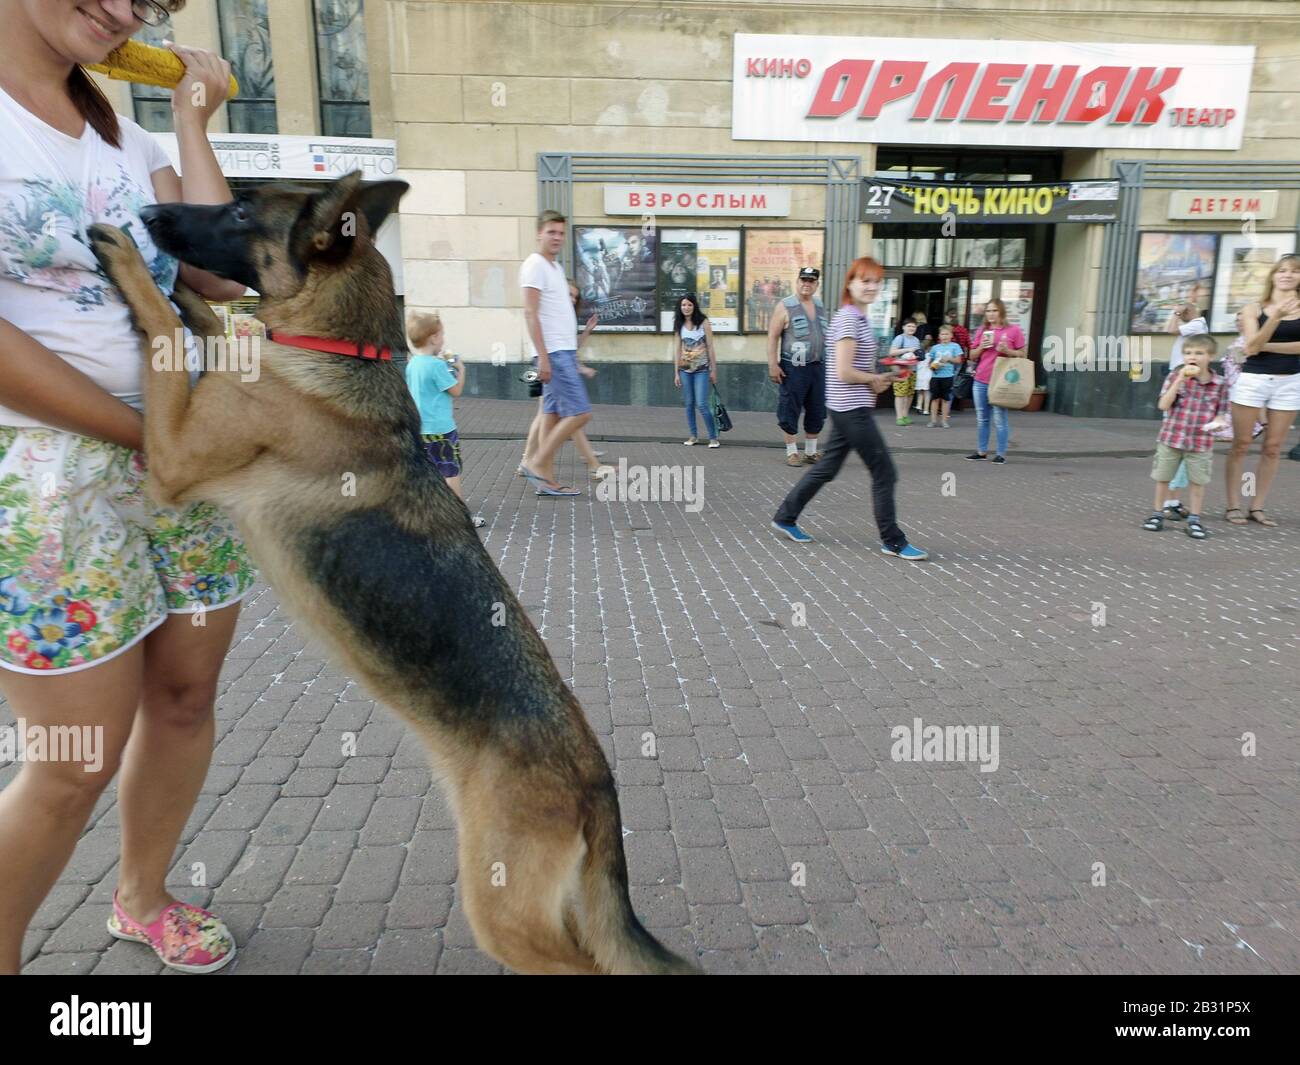 A trained dog stands on a city street.It is standing on its hind legs and stand bunny.Dog breed shepherd. Performs training numbers. Stock Photo